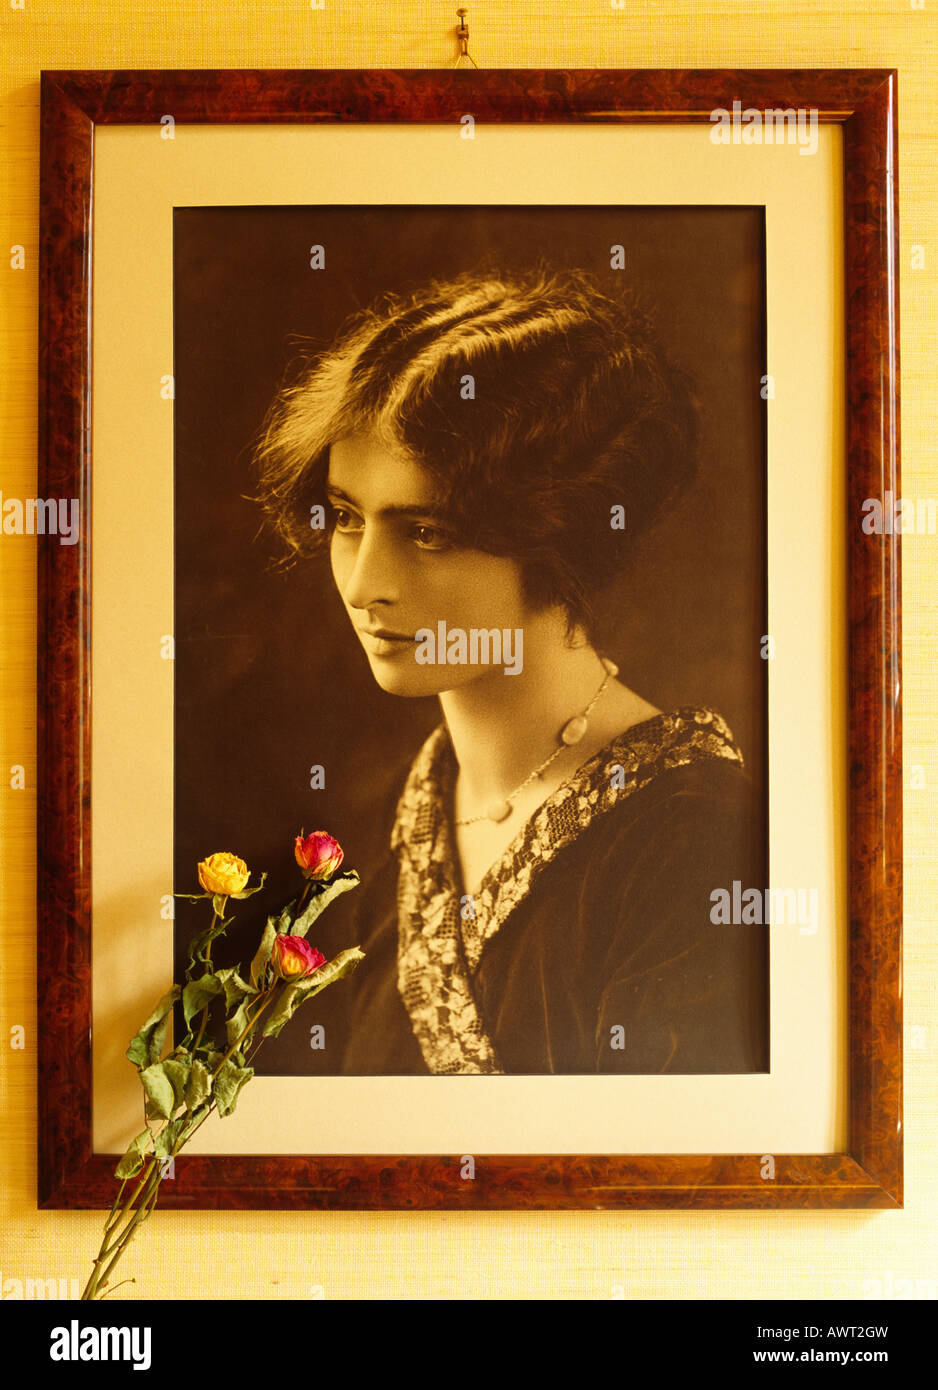 1920's vintage framed portrait of a young woman and withered roses flowers Stock Photo